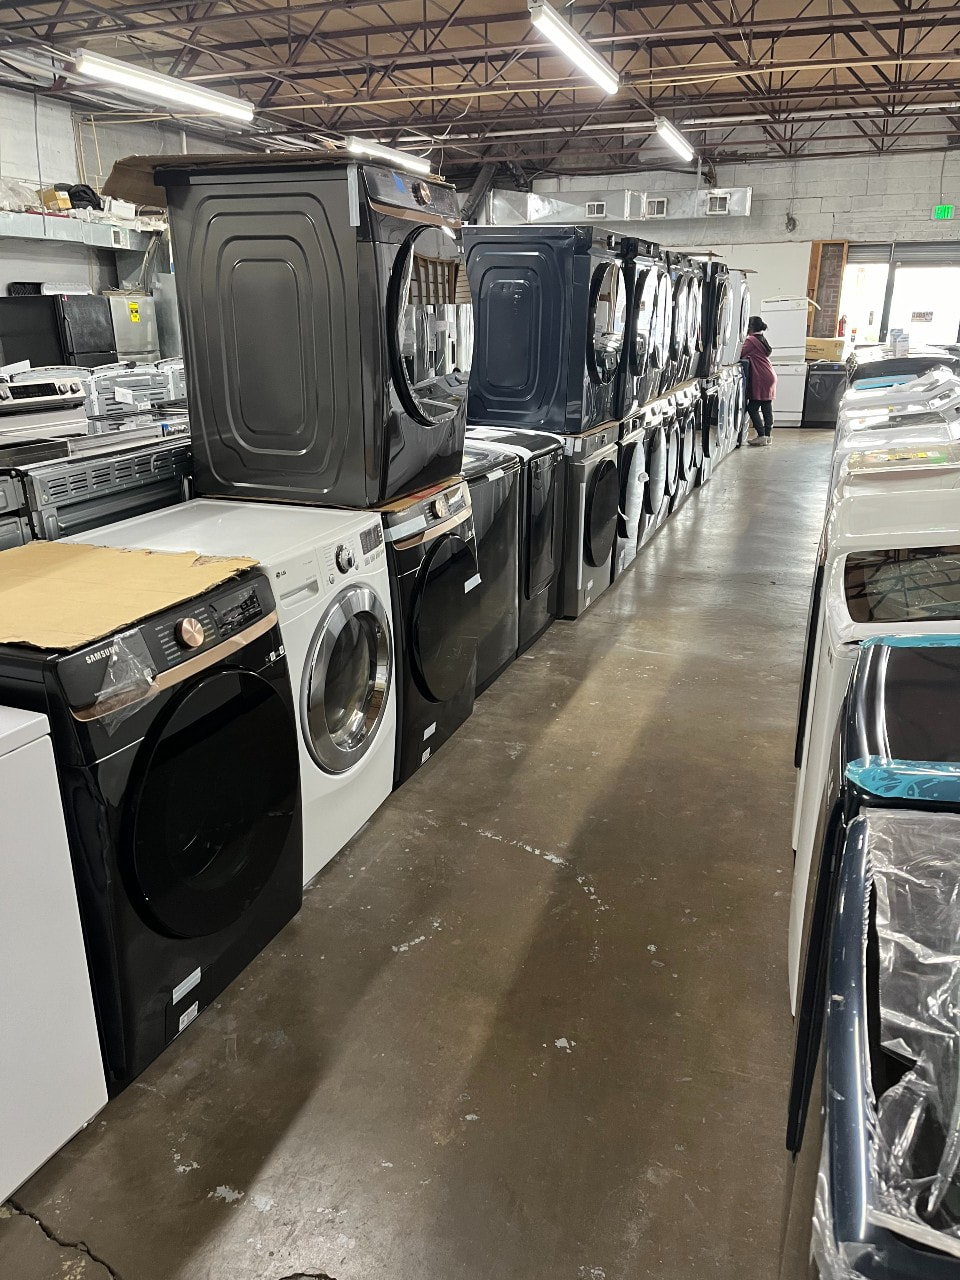 Used appliances